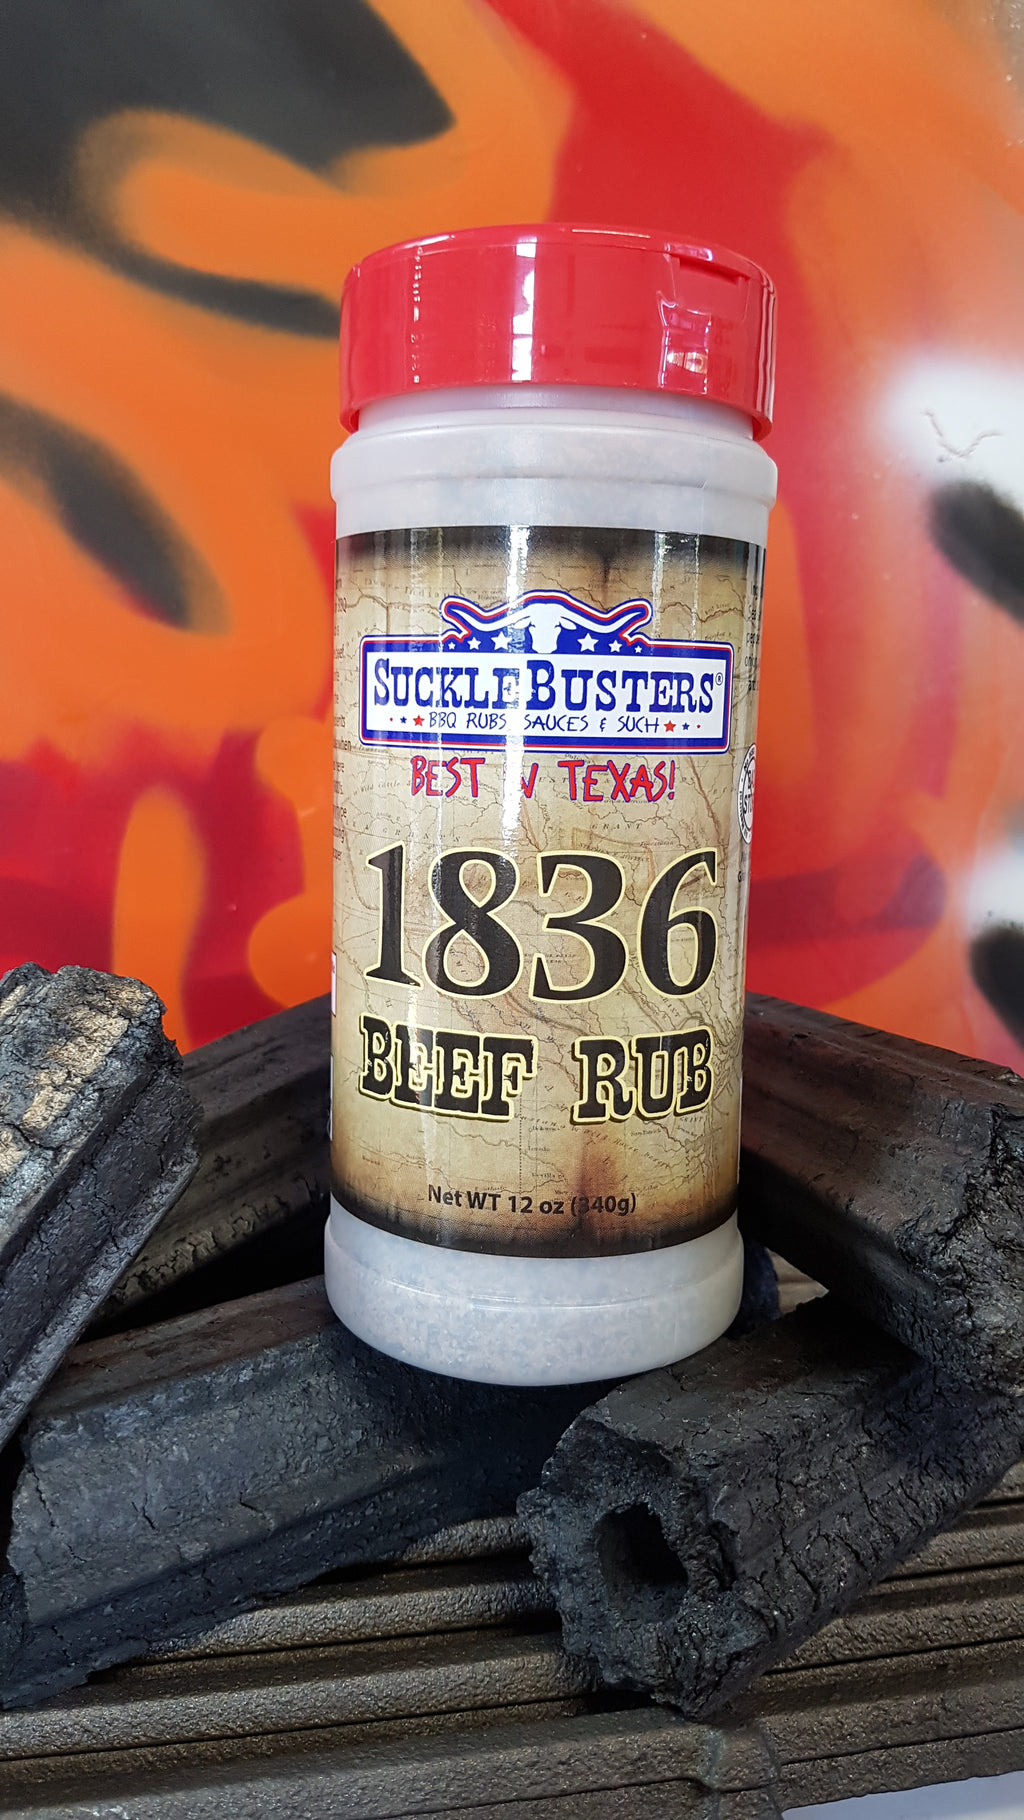 1836 Beef Rub from Suckle Buster